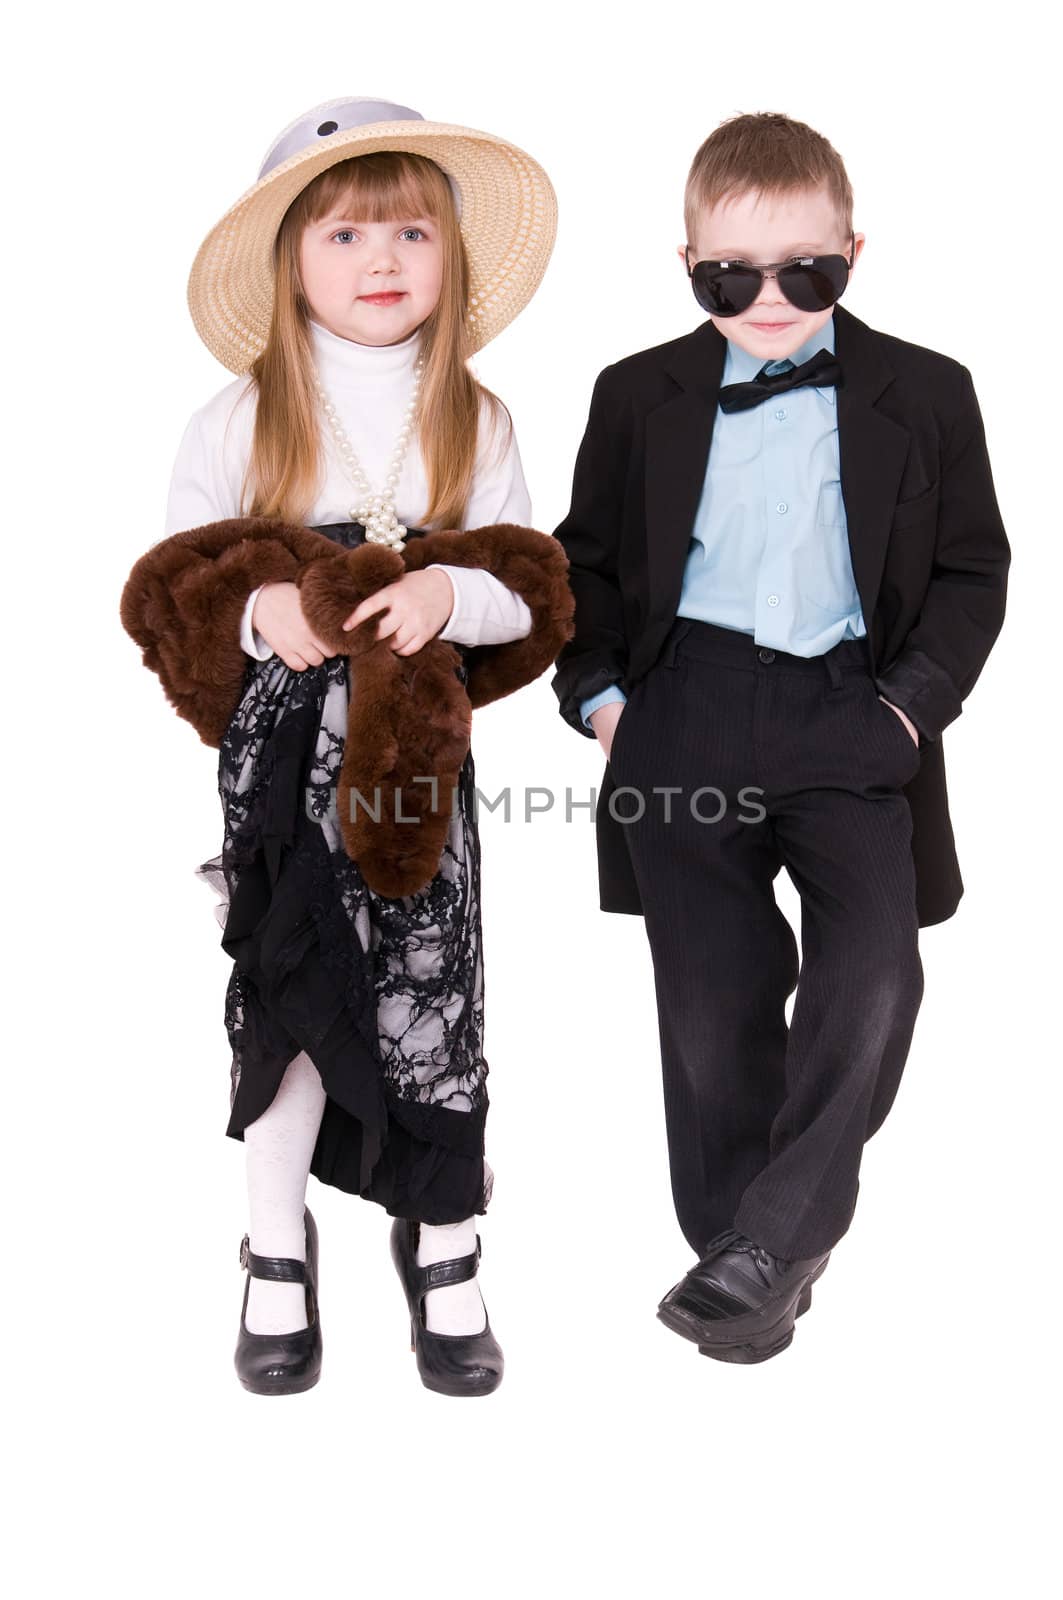 girl in hat and boy in a black suit isolated on white background